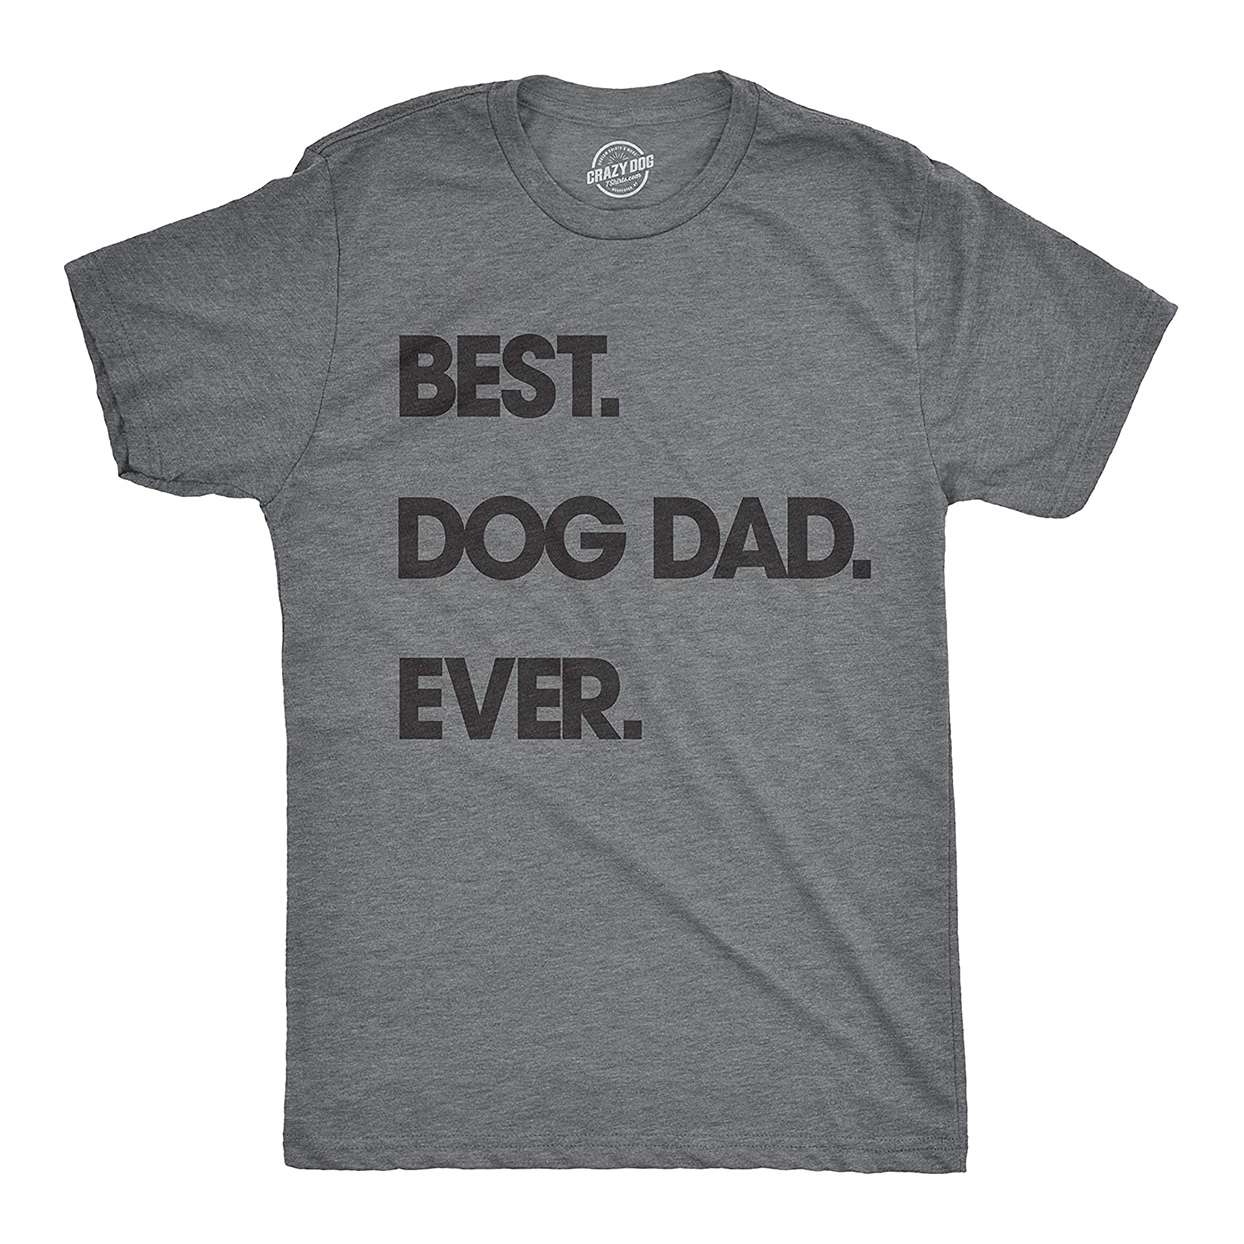 Product photo of a Men’s Best Dog Dad Ever T-Shirt on a white background